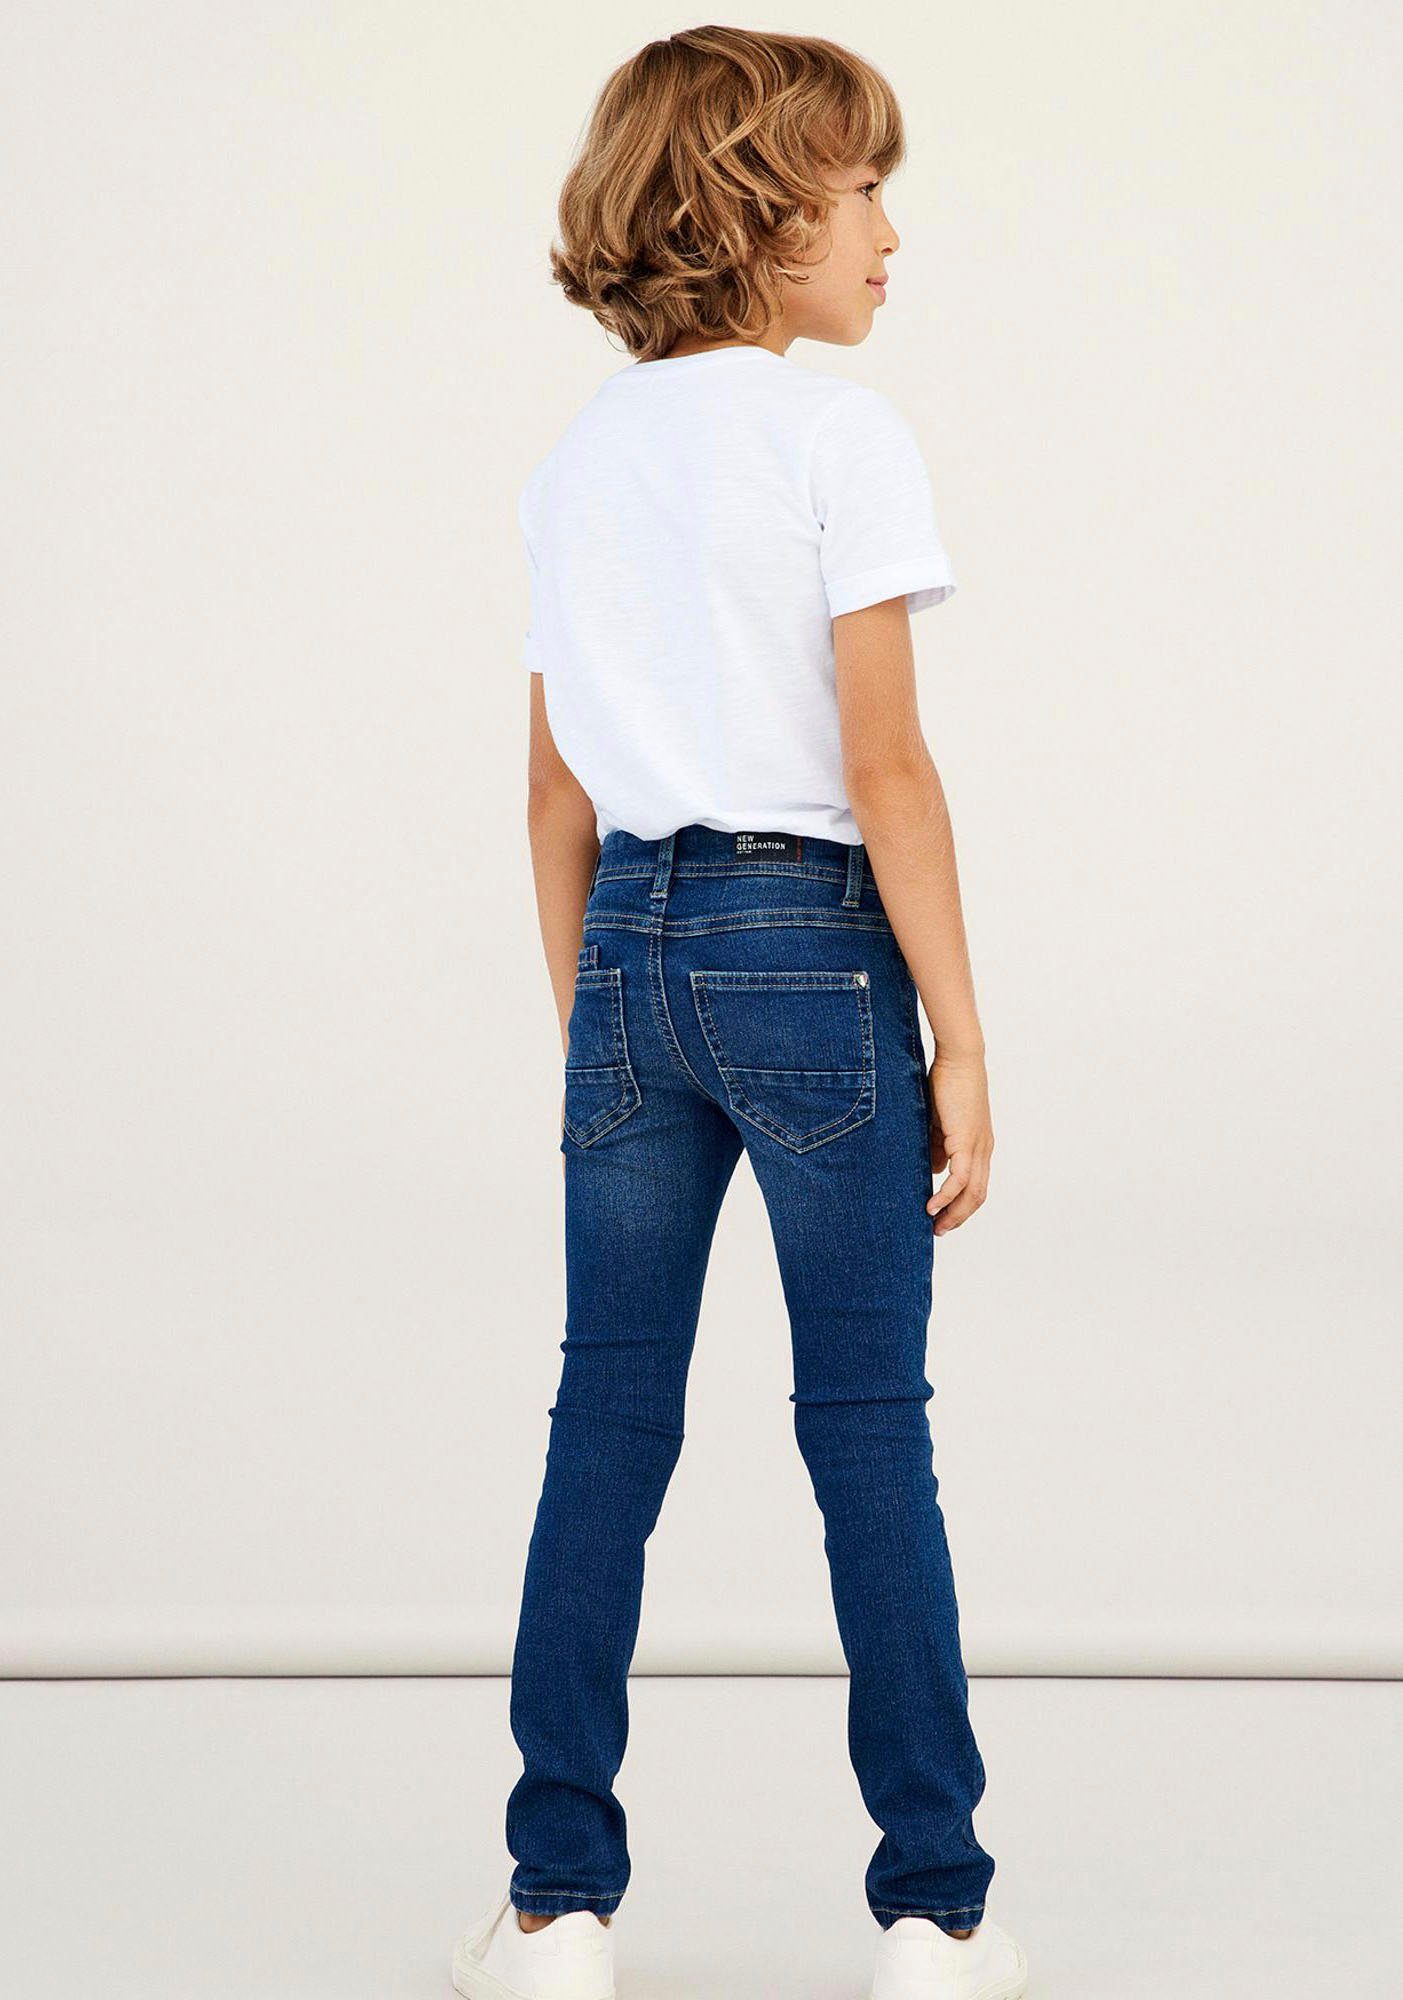 NKMTHEO It PANT 3618 DNMTAUL Stretch-Jeans Name